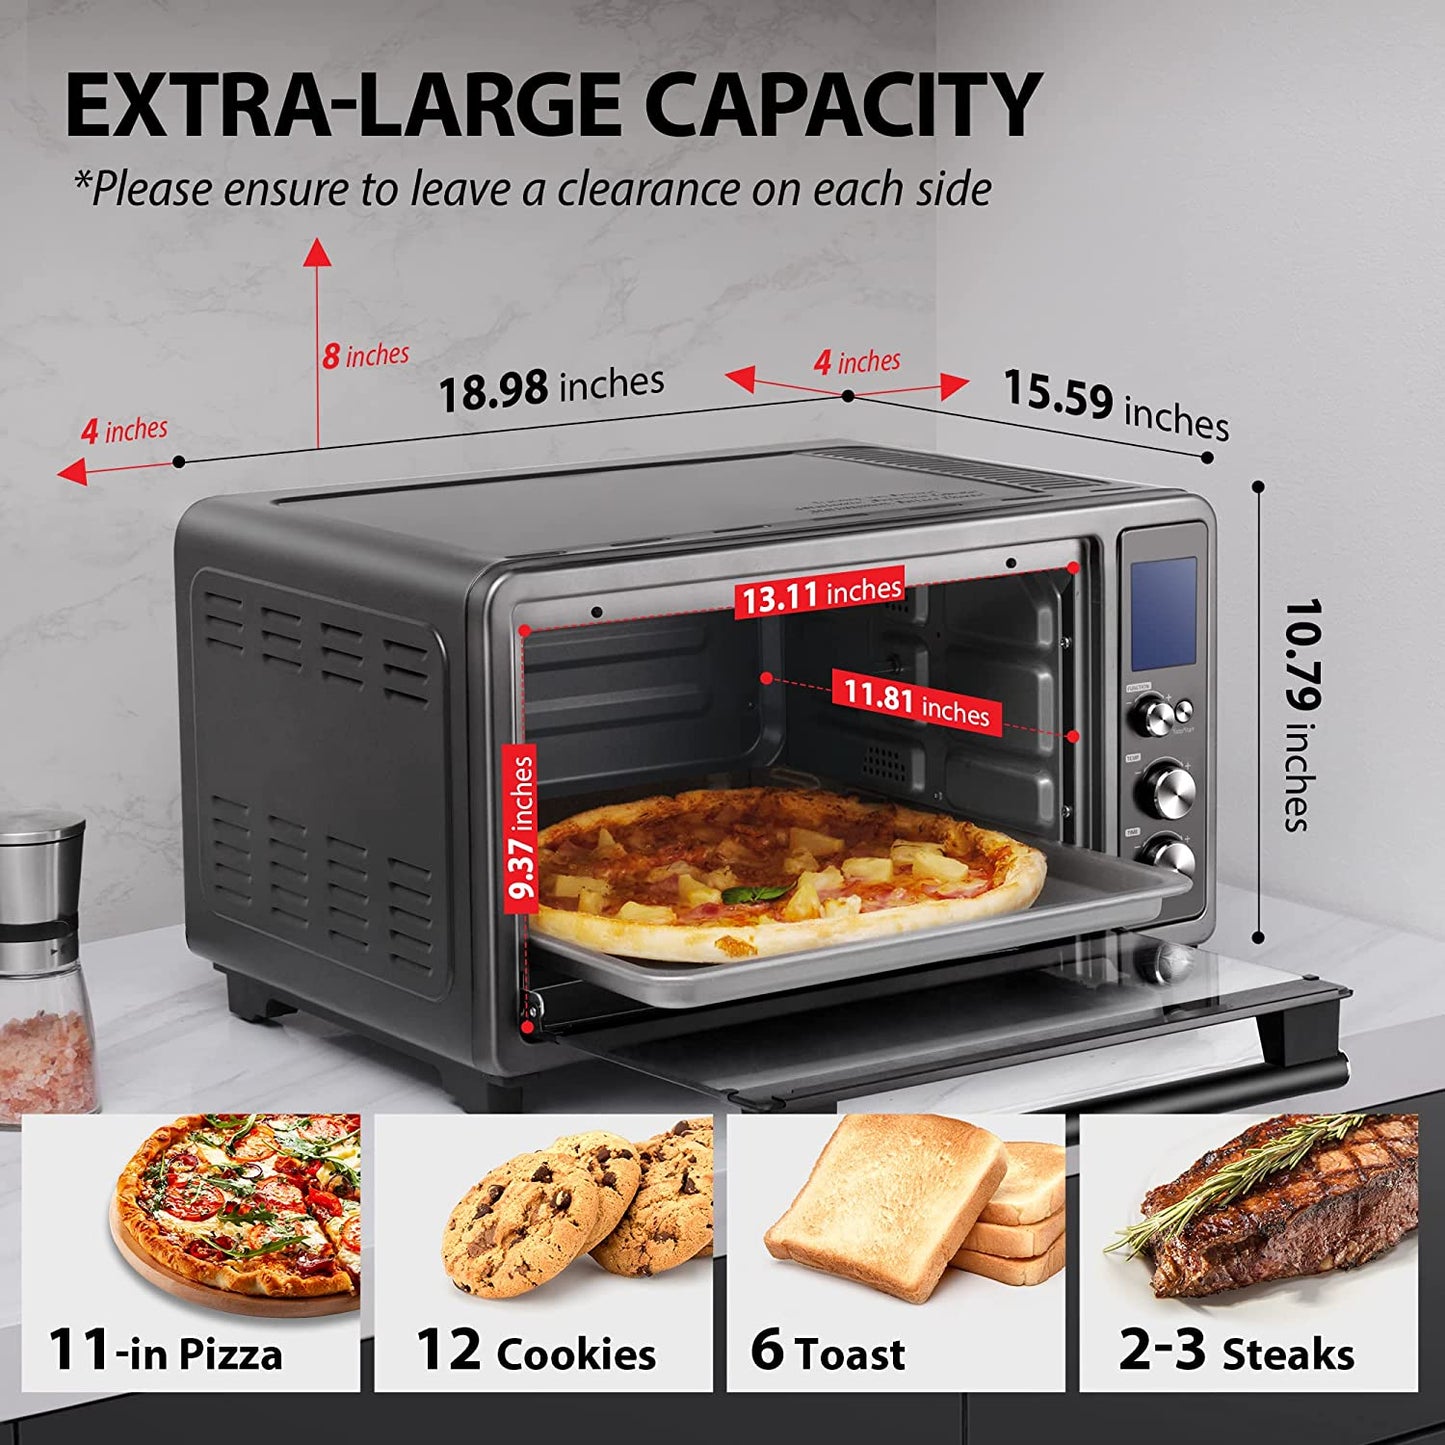 Toshiba High-Speed Convection Toaster Oven with Dual Infrared Heating, 10 Functions including Toast, Pizza, and Rotisserie, Spacious 6-Slice Capacity, 1700W